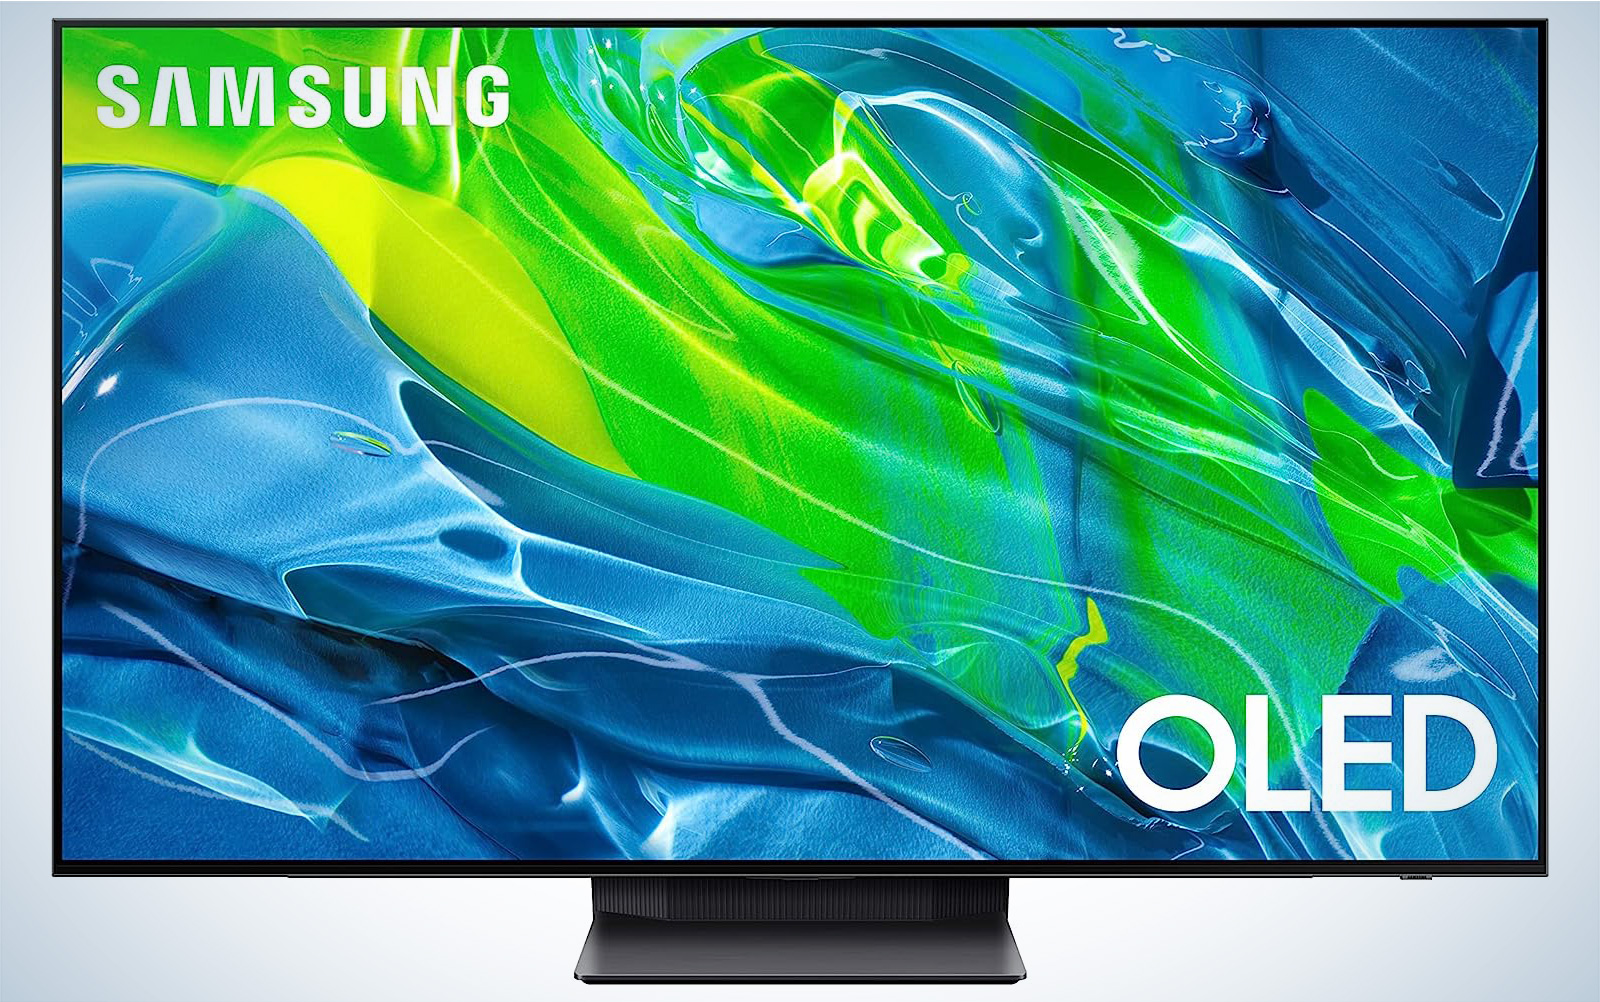 Samsung S95B OLED TV with a blue and green pattern on the screen